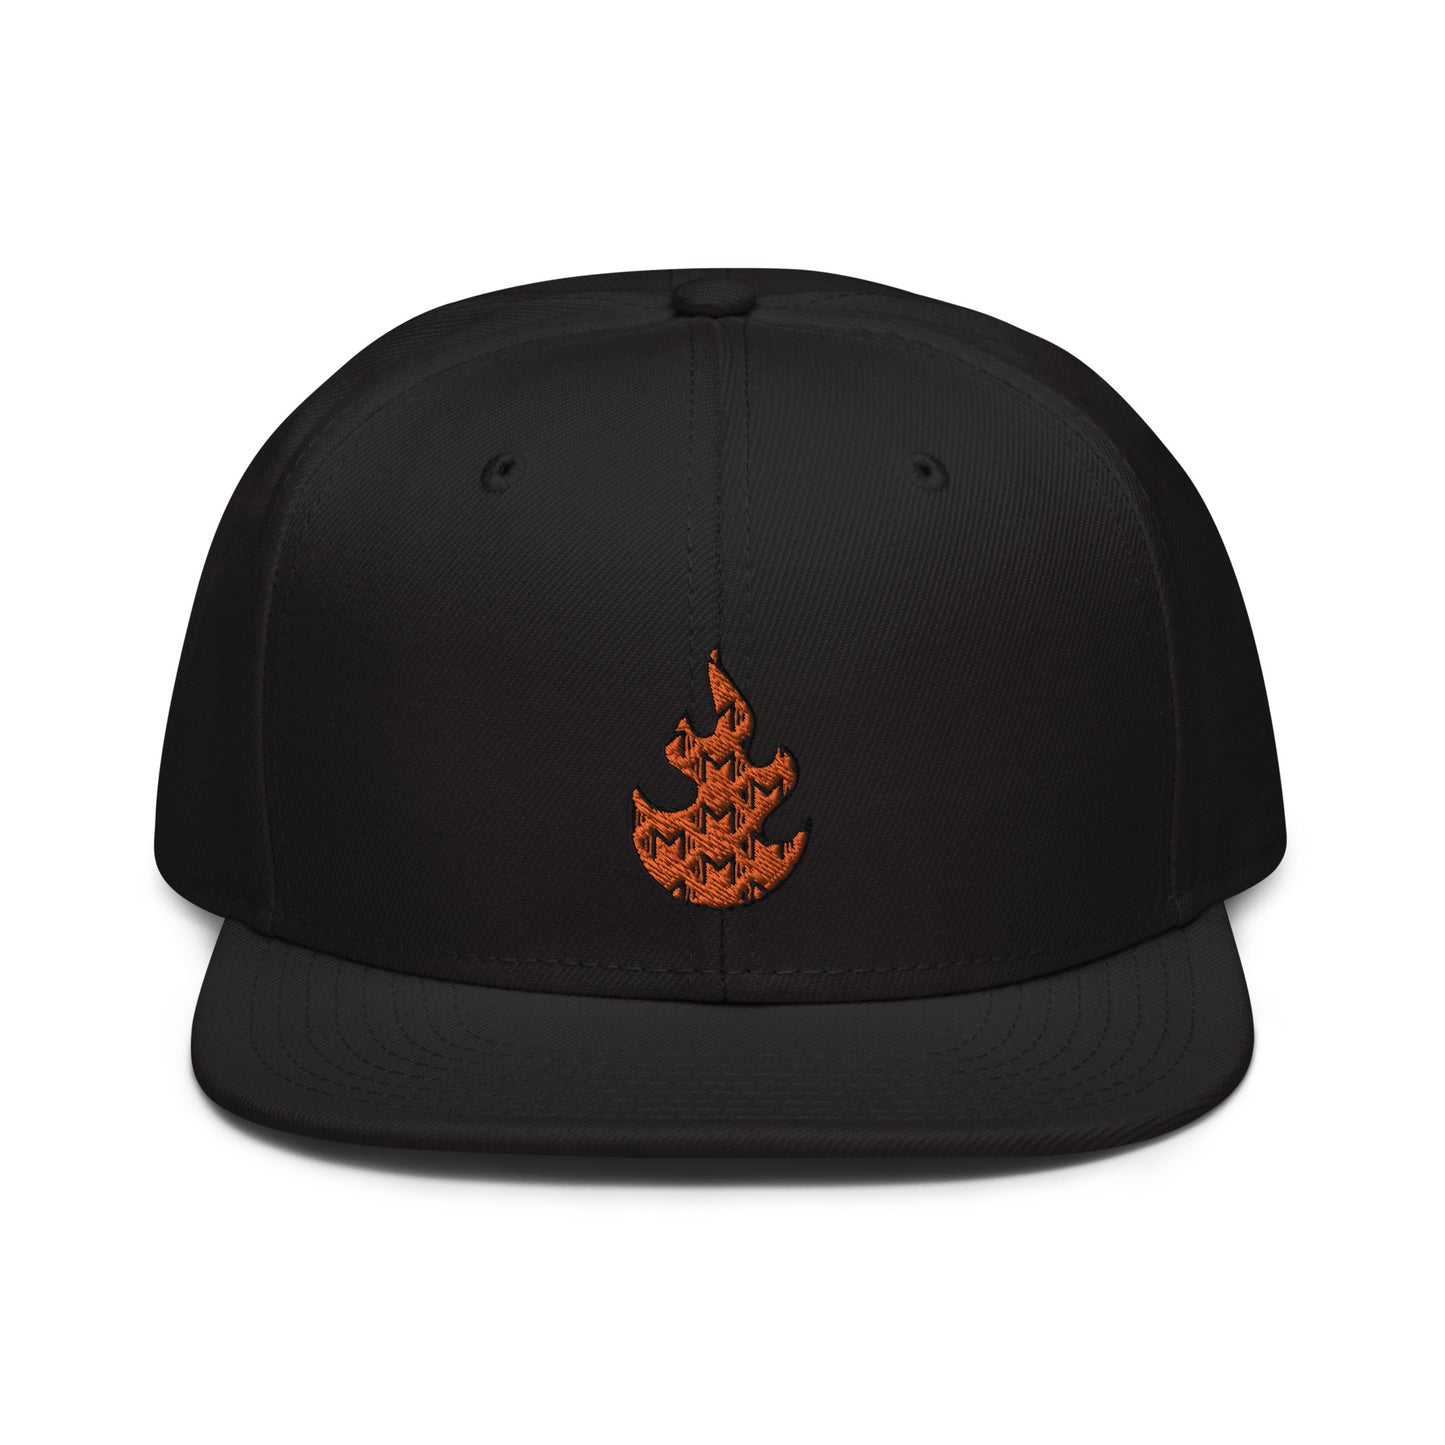 The Fire Snapback Hat - Black Edition